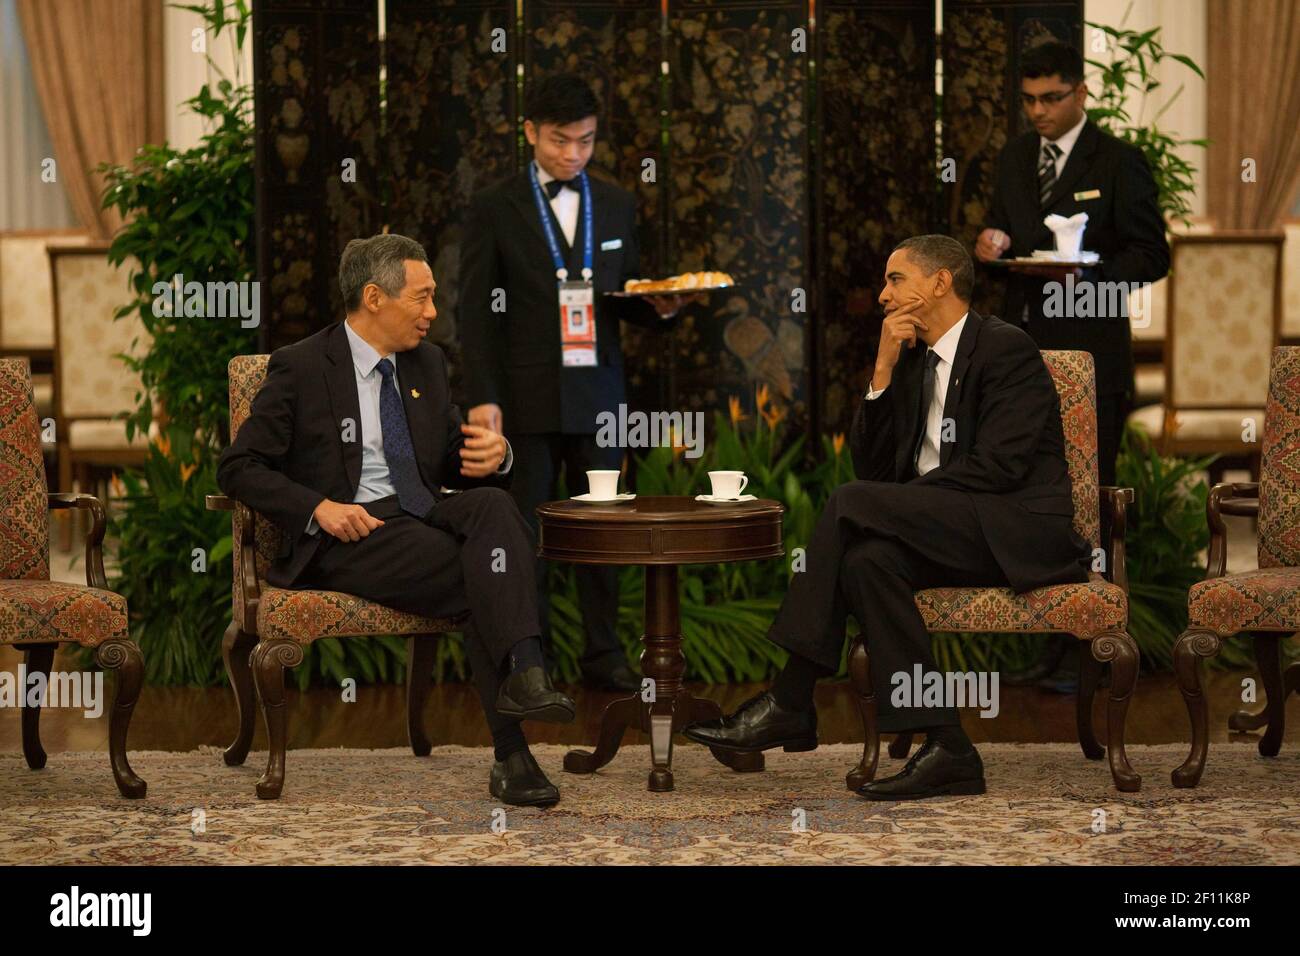 15 November 2009 - Singapore - President Barack Obama meets with SingaporeÃ•s Prime Minister Lee Hsien Loong, while attending the APEC Summit in Singapore, Nov. 15, 2009. Photo Credit: Pete Souza / White House/Sipa Press This official White House photograph is being made available only for publication by news organizations and/or for personal use printing by the subject(s) of the photograph. The photograph may not be manipulated in any way and may not be used in commercial or political materials, advertisements, emails, products, promotions that in any way suggests approval or endorsement of t Stock Photo